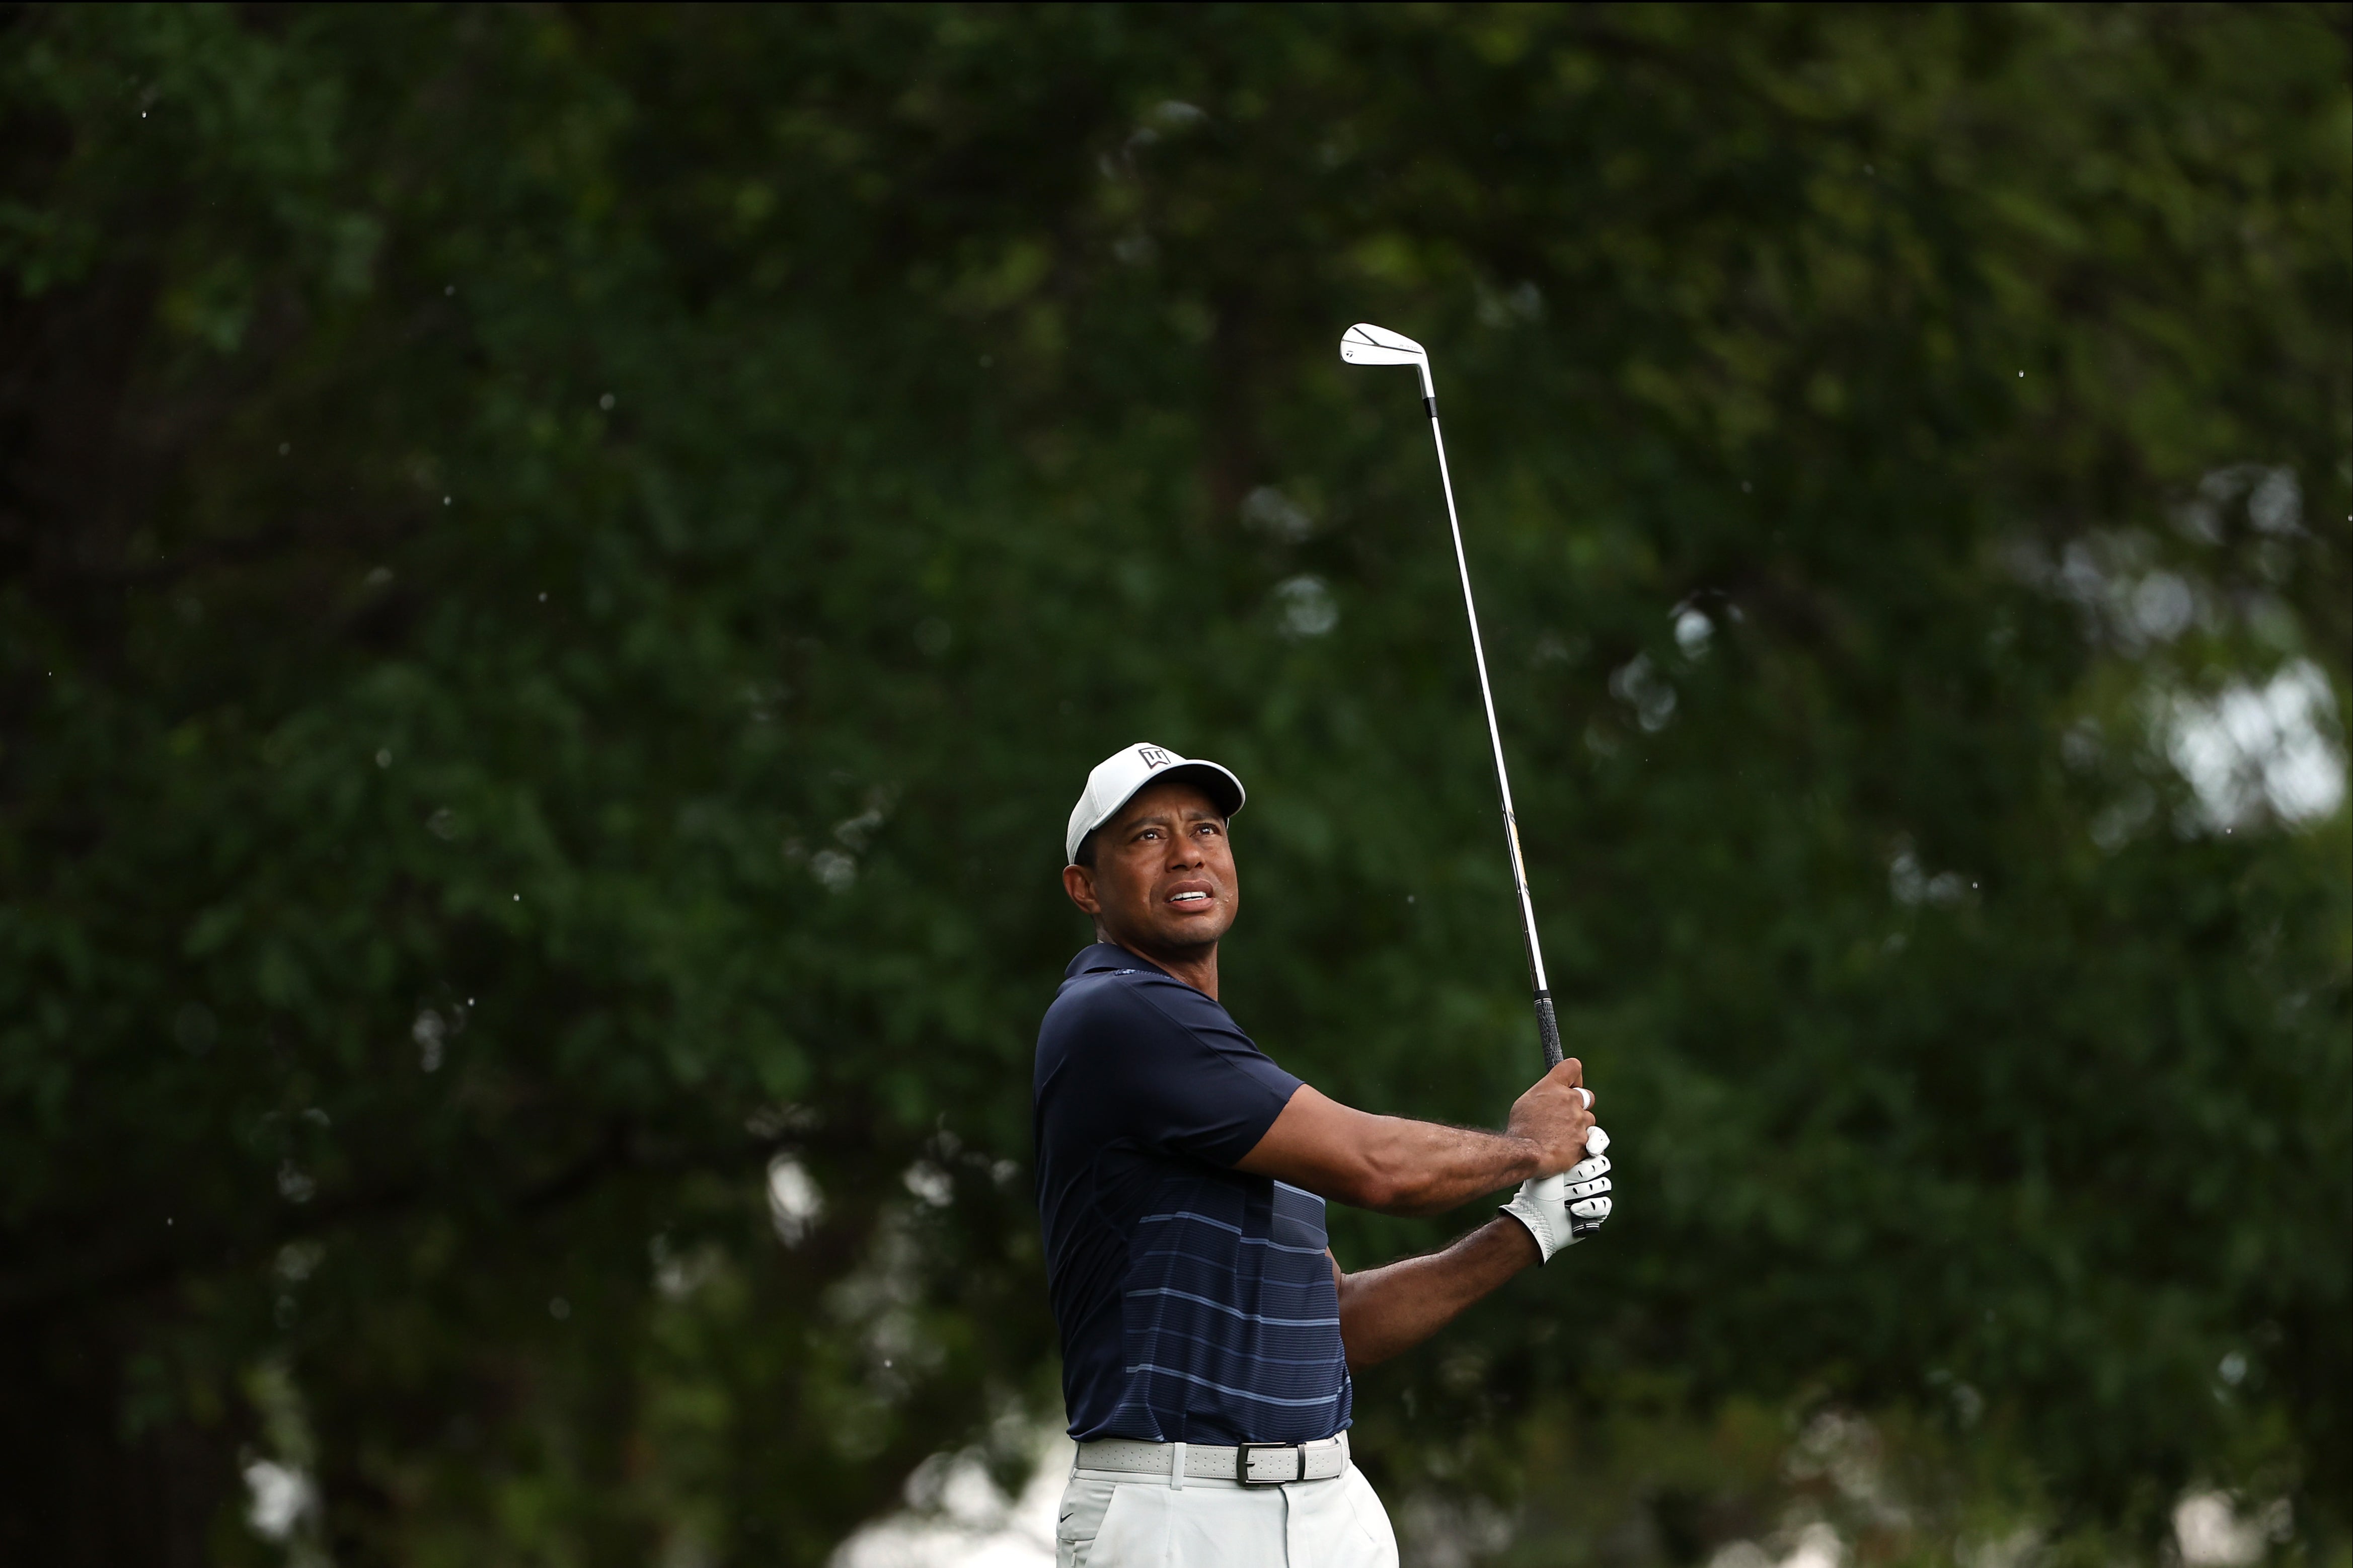 Tiger Woods made his return to professional golf in the Bahamas